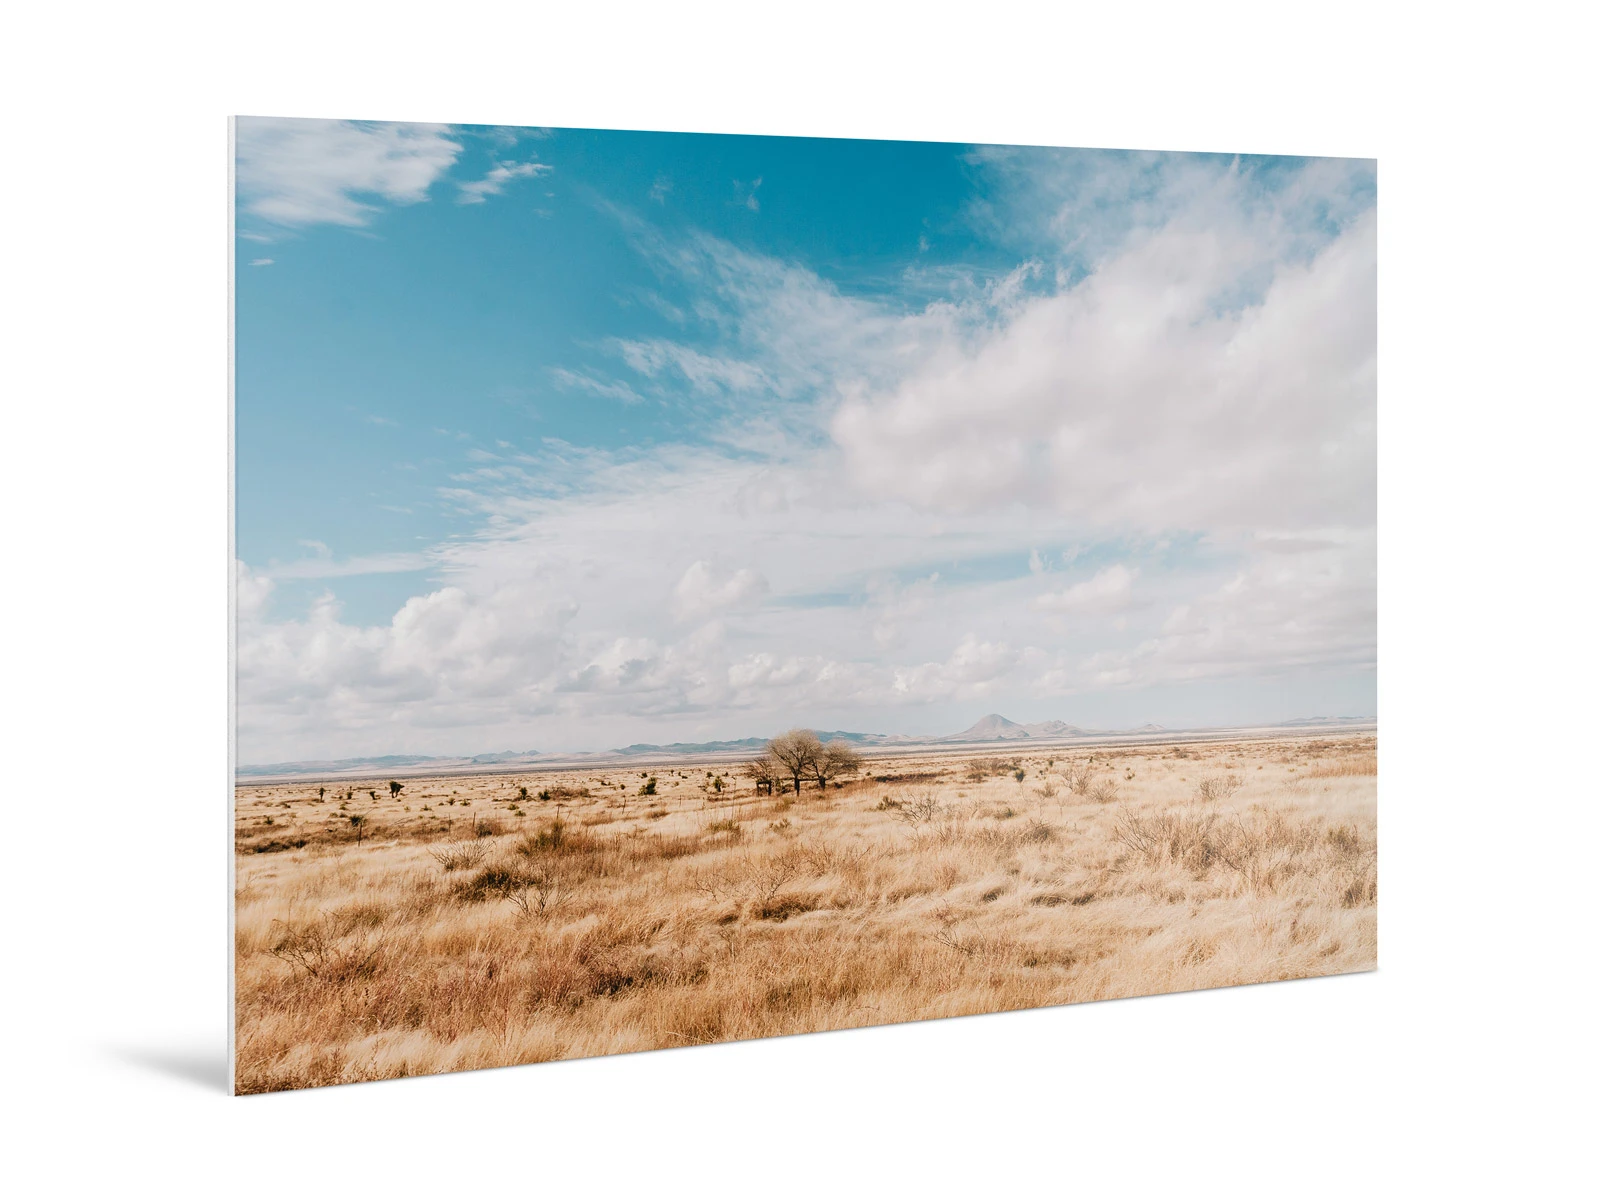 Clouds drifting over a parched landscape with mountains in the background, printed on a Direct Print On Forex.